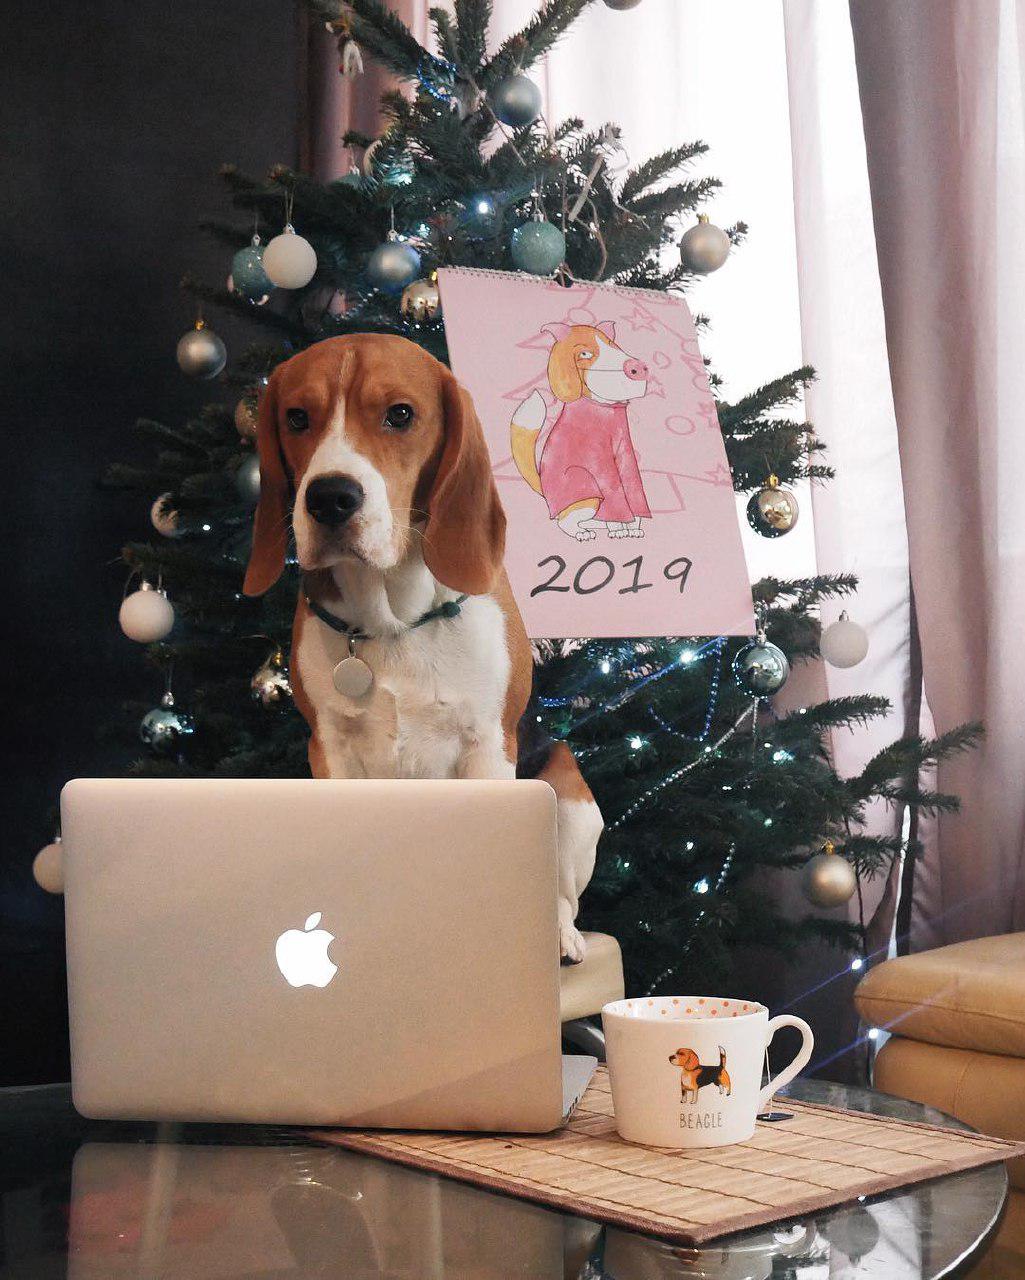 Beagle sitting on the chair in front of lap top and a cup of tee on the table